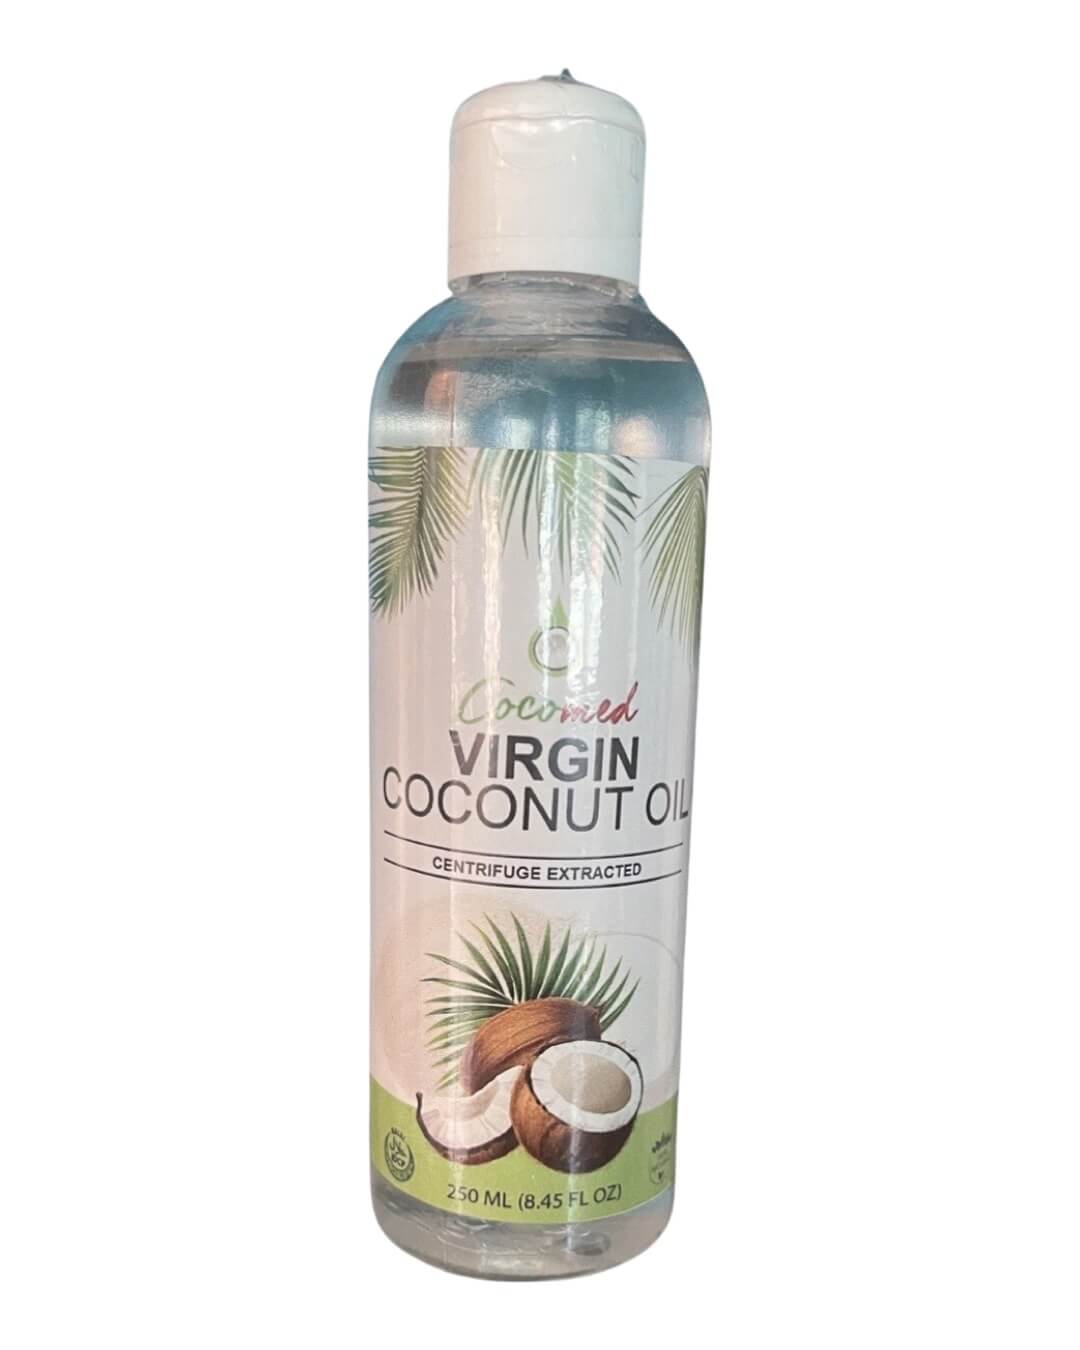 Cocomed Virgin Coconut Oil Centrifuge Extracted  250mL